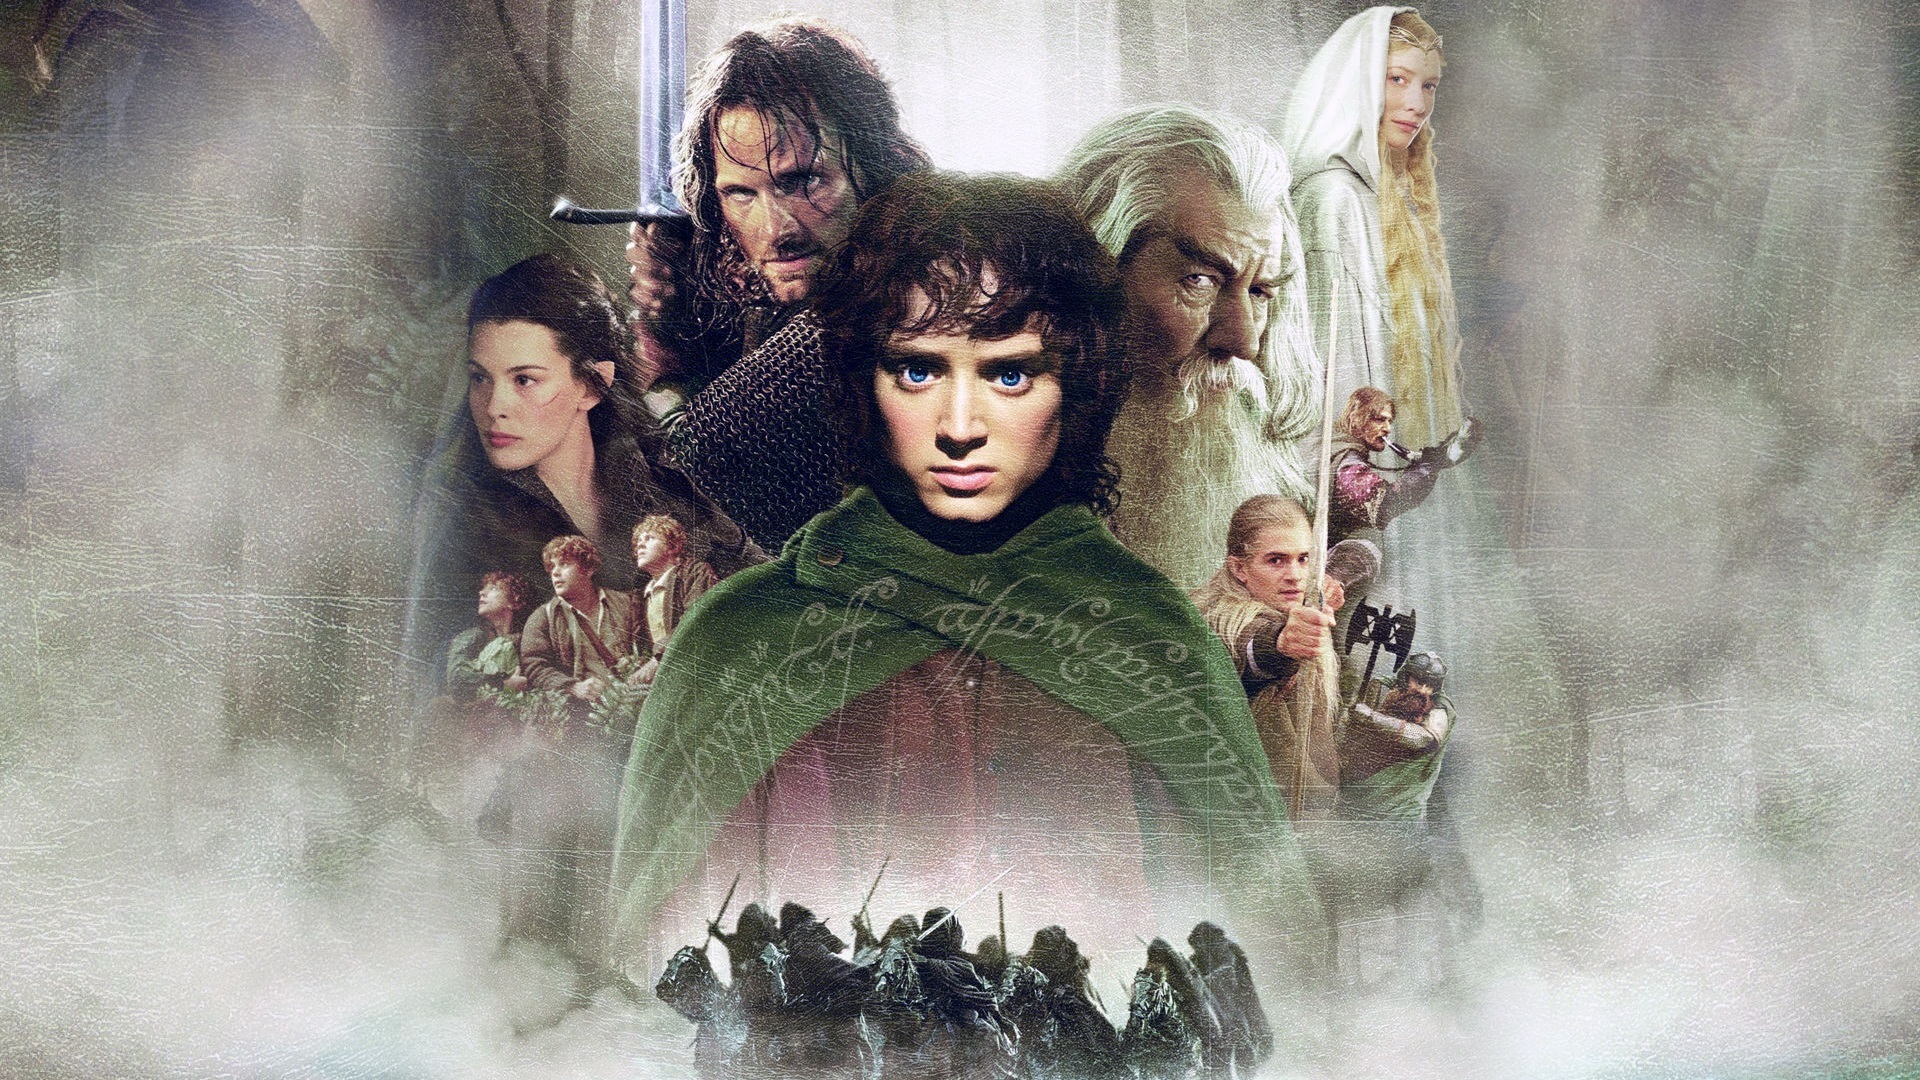 the lord of the rings: the fellowship of the ring, movie, the lord of the rings